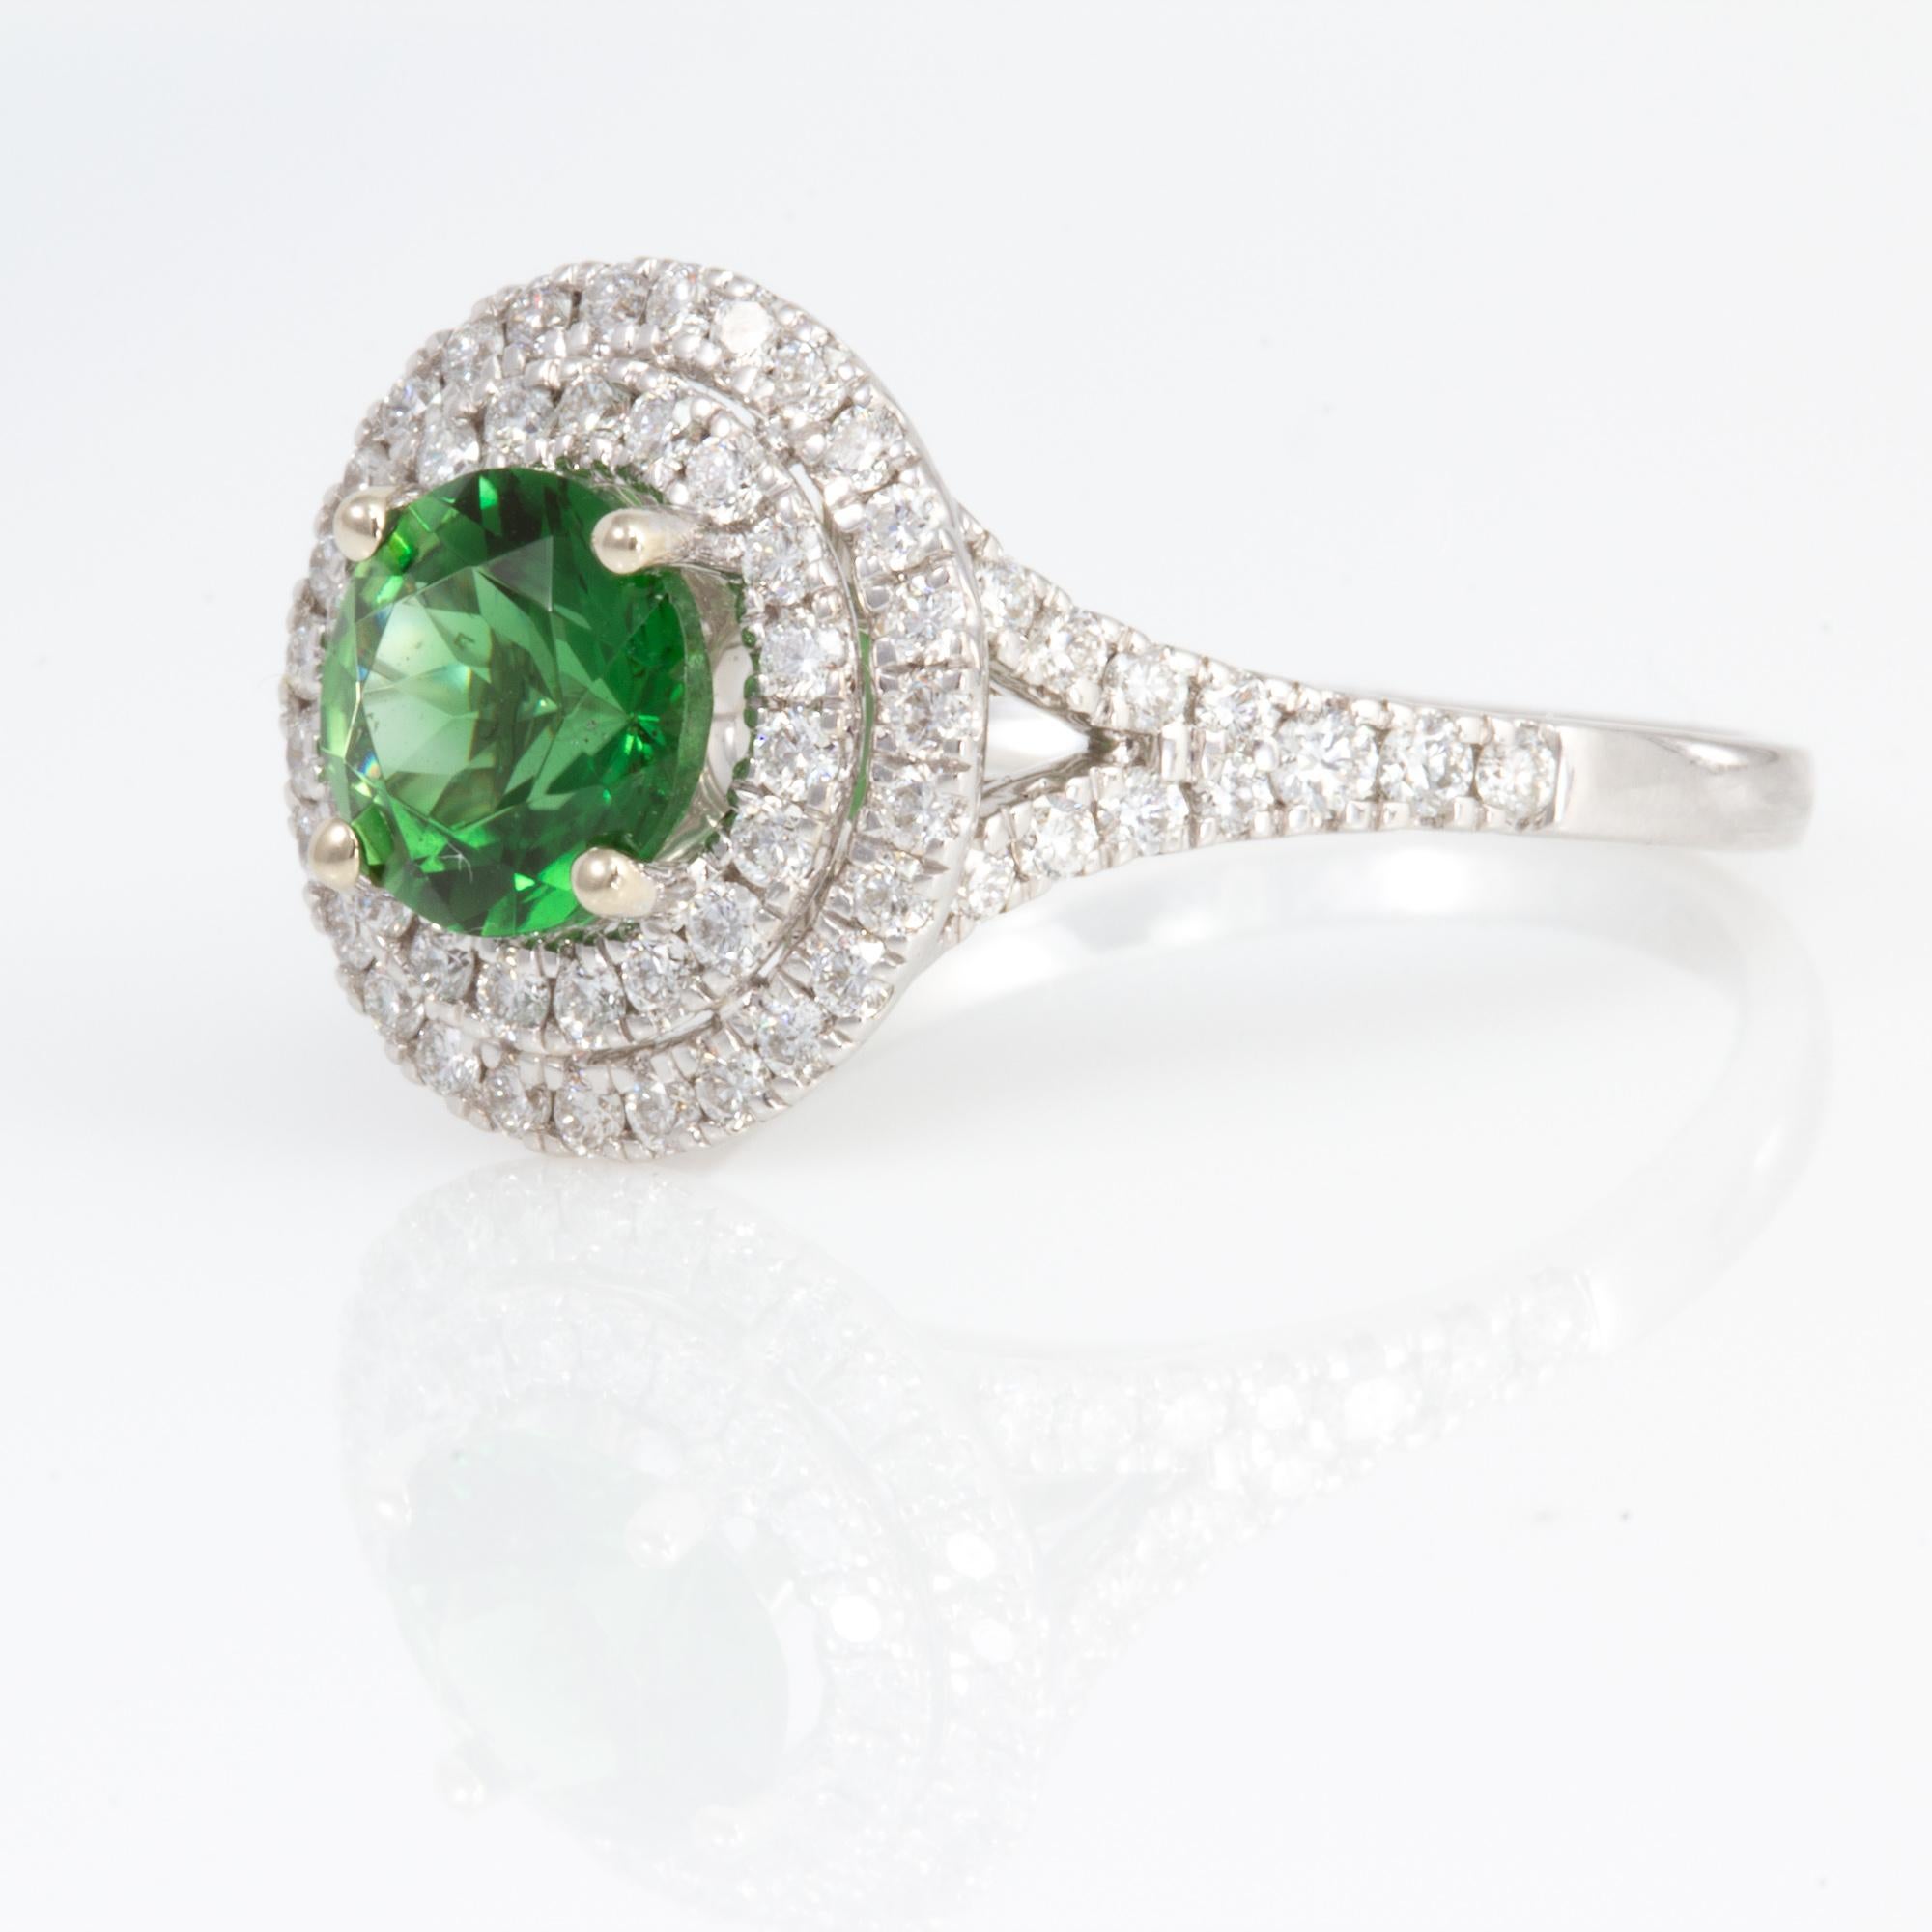 Exceptionally Well Cut 1.26 Carat Chrome Tourmaline and Diamond Ring 4